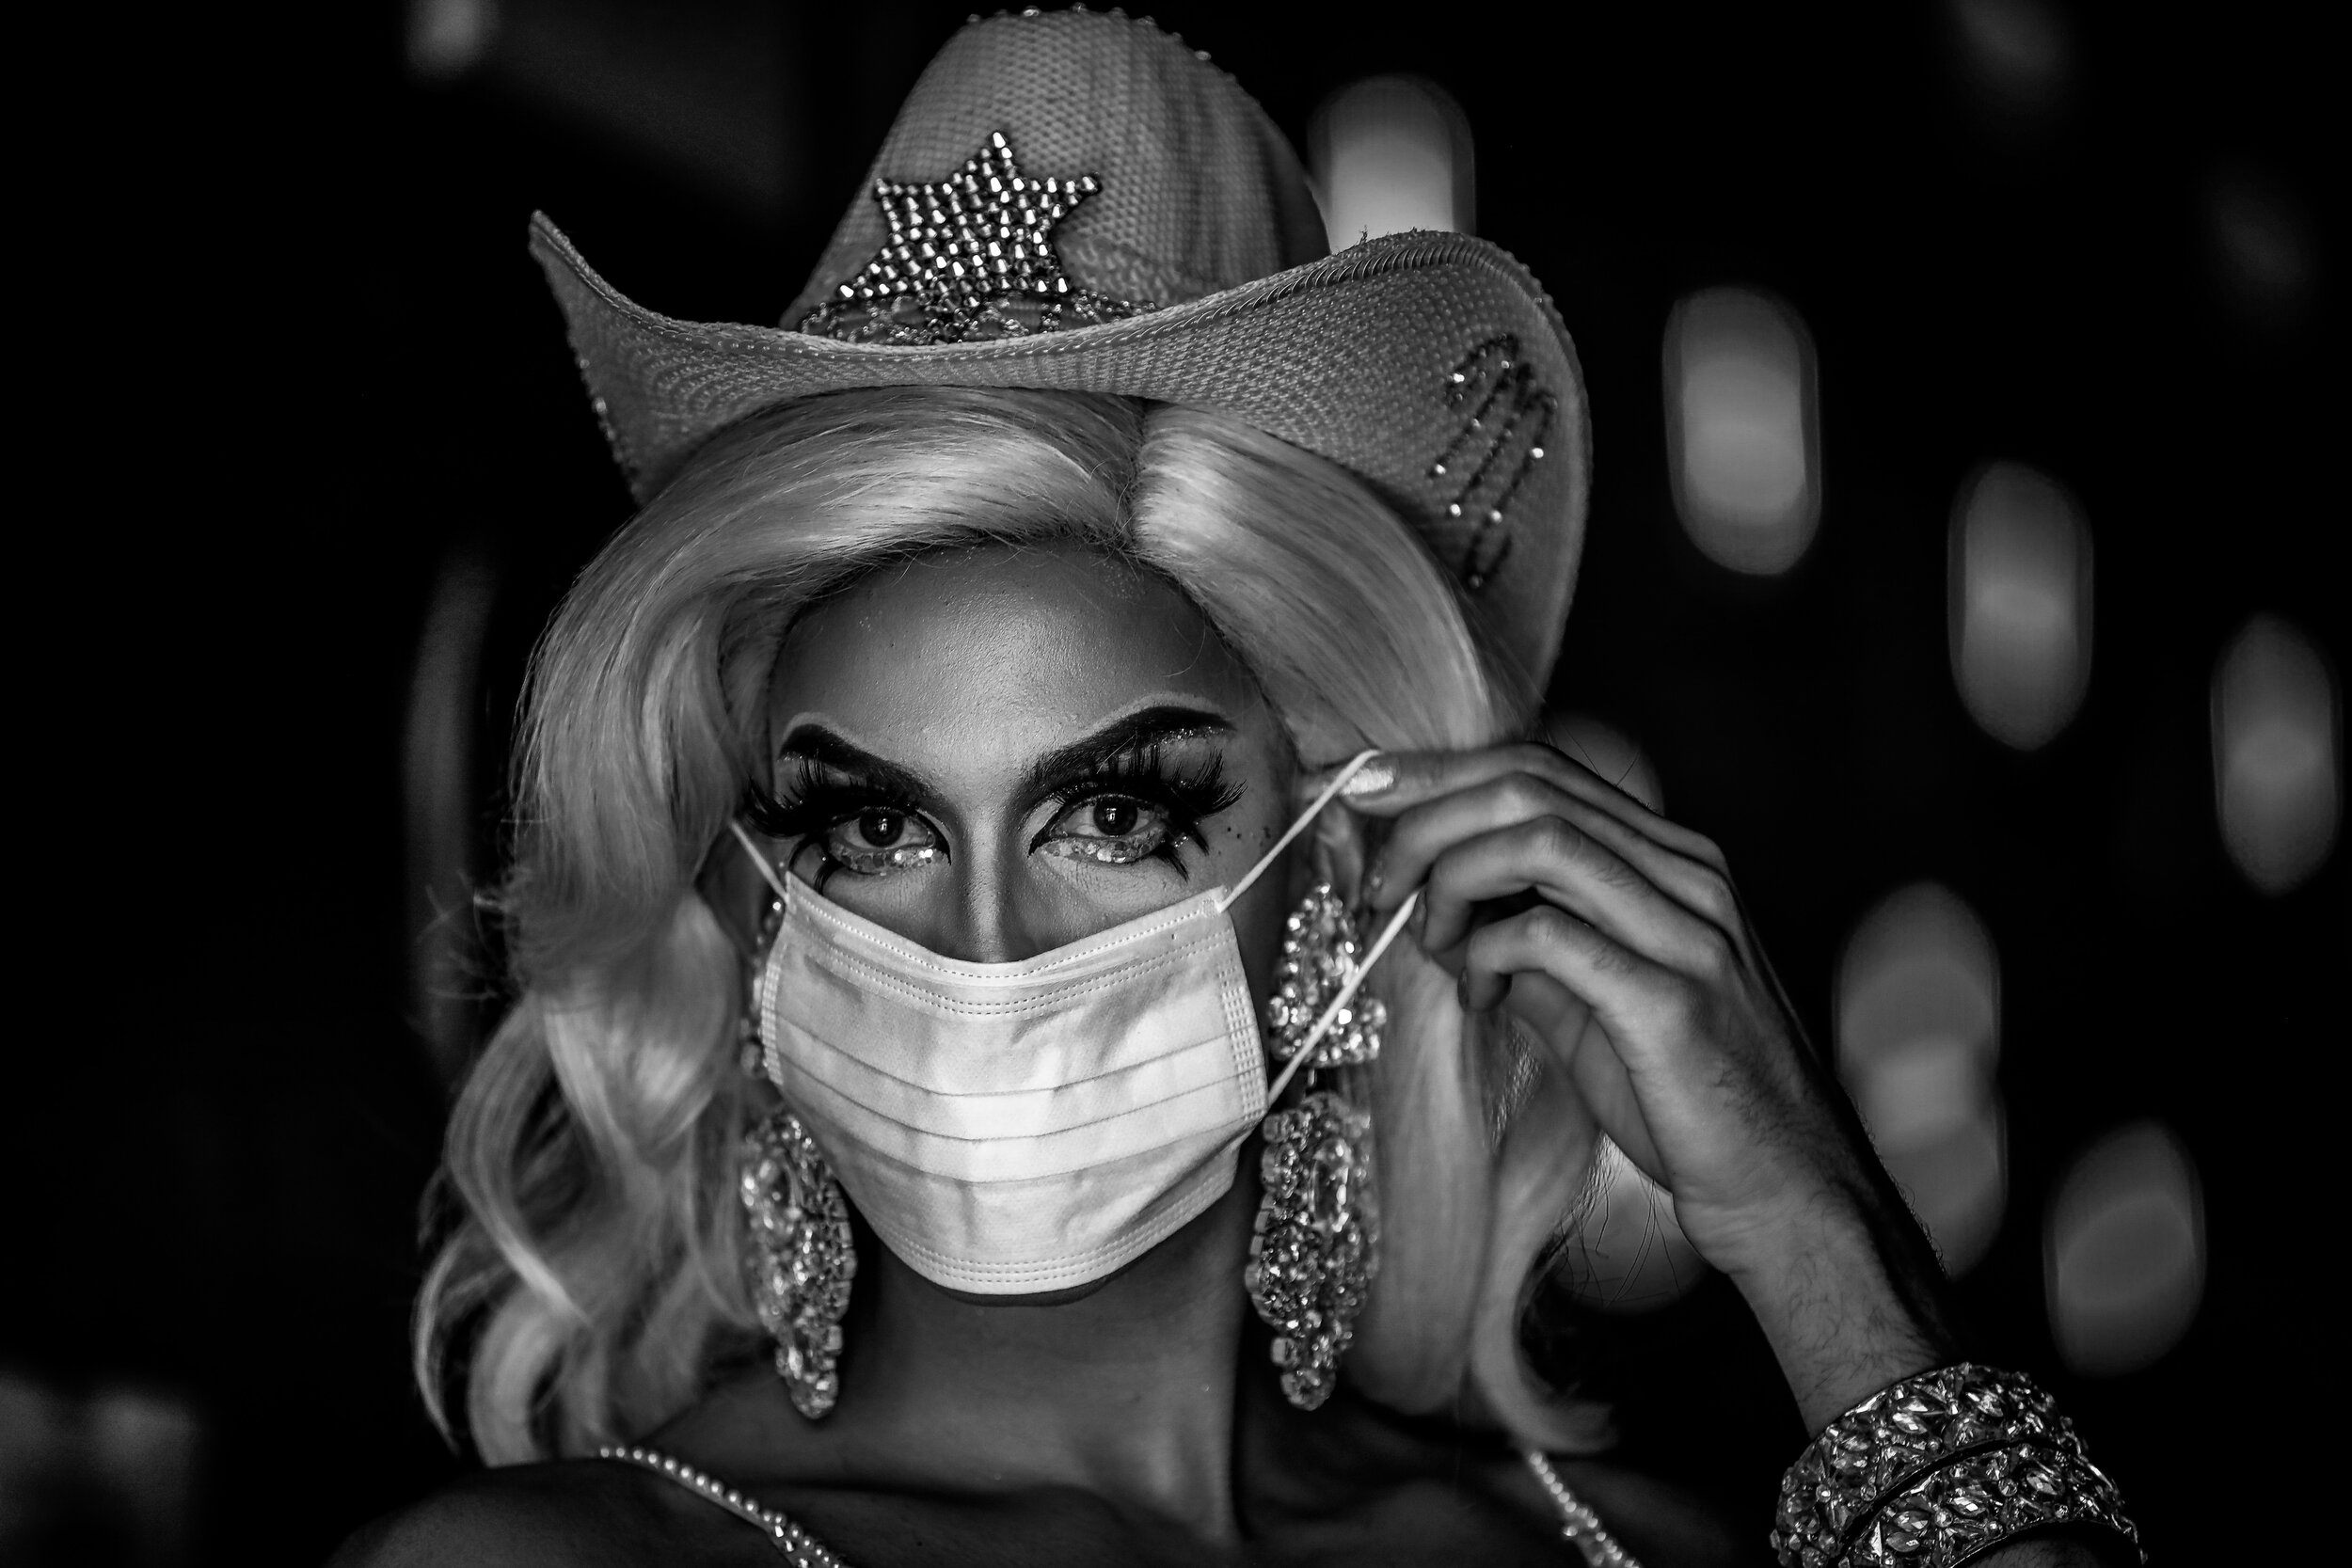  Miss Canada Continental Mona Moore before performing during the Stampede Drag Brunch at Wildhorse Saloon in Calgary, Alta., on July 11, 2020.  